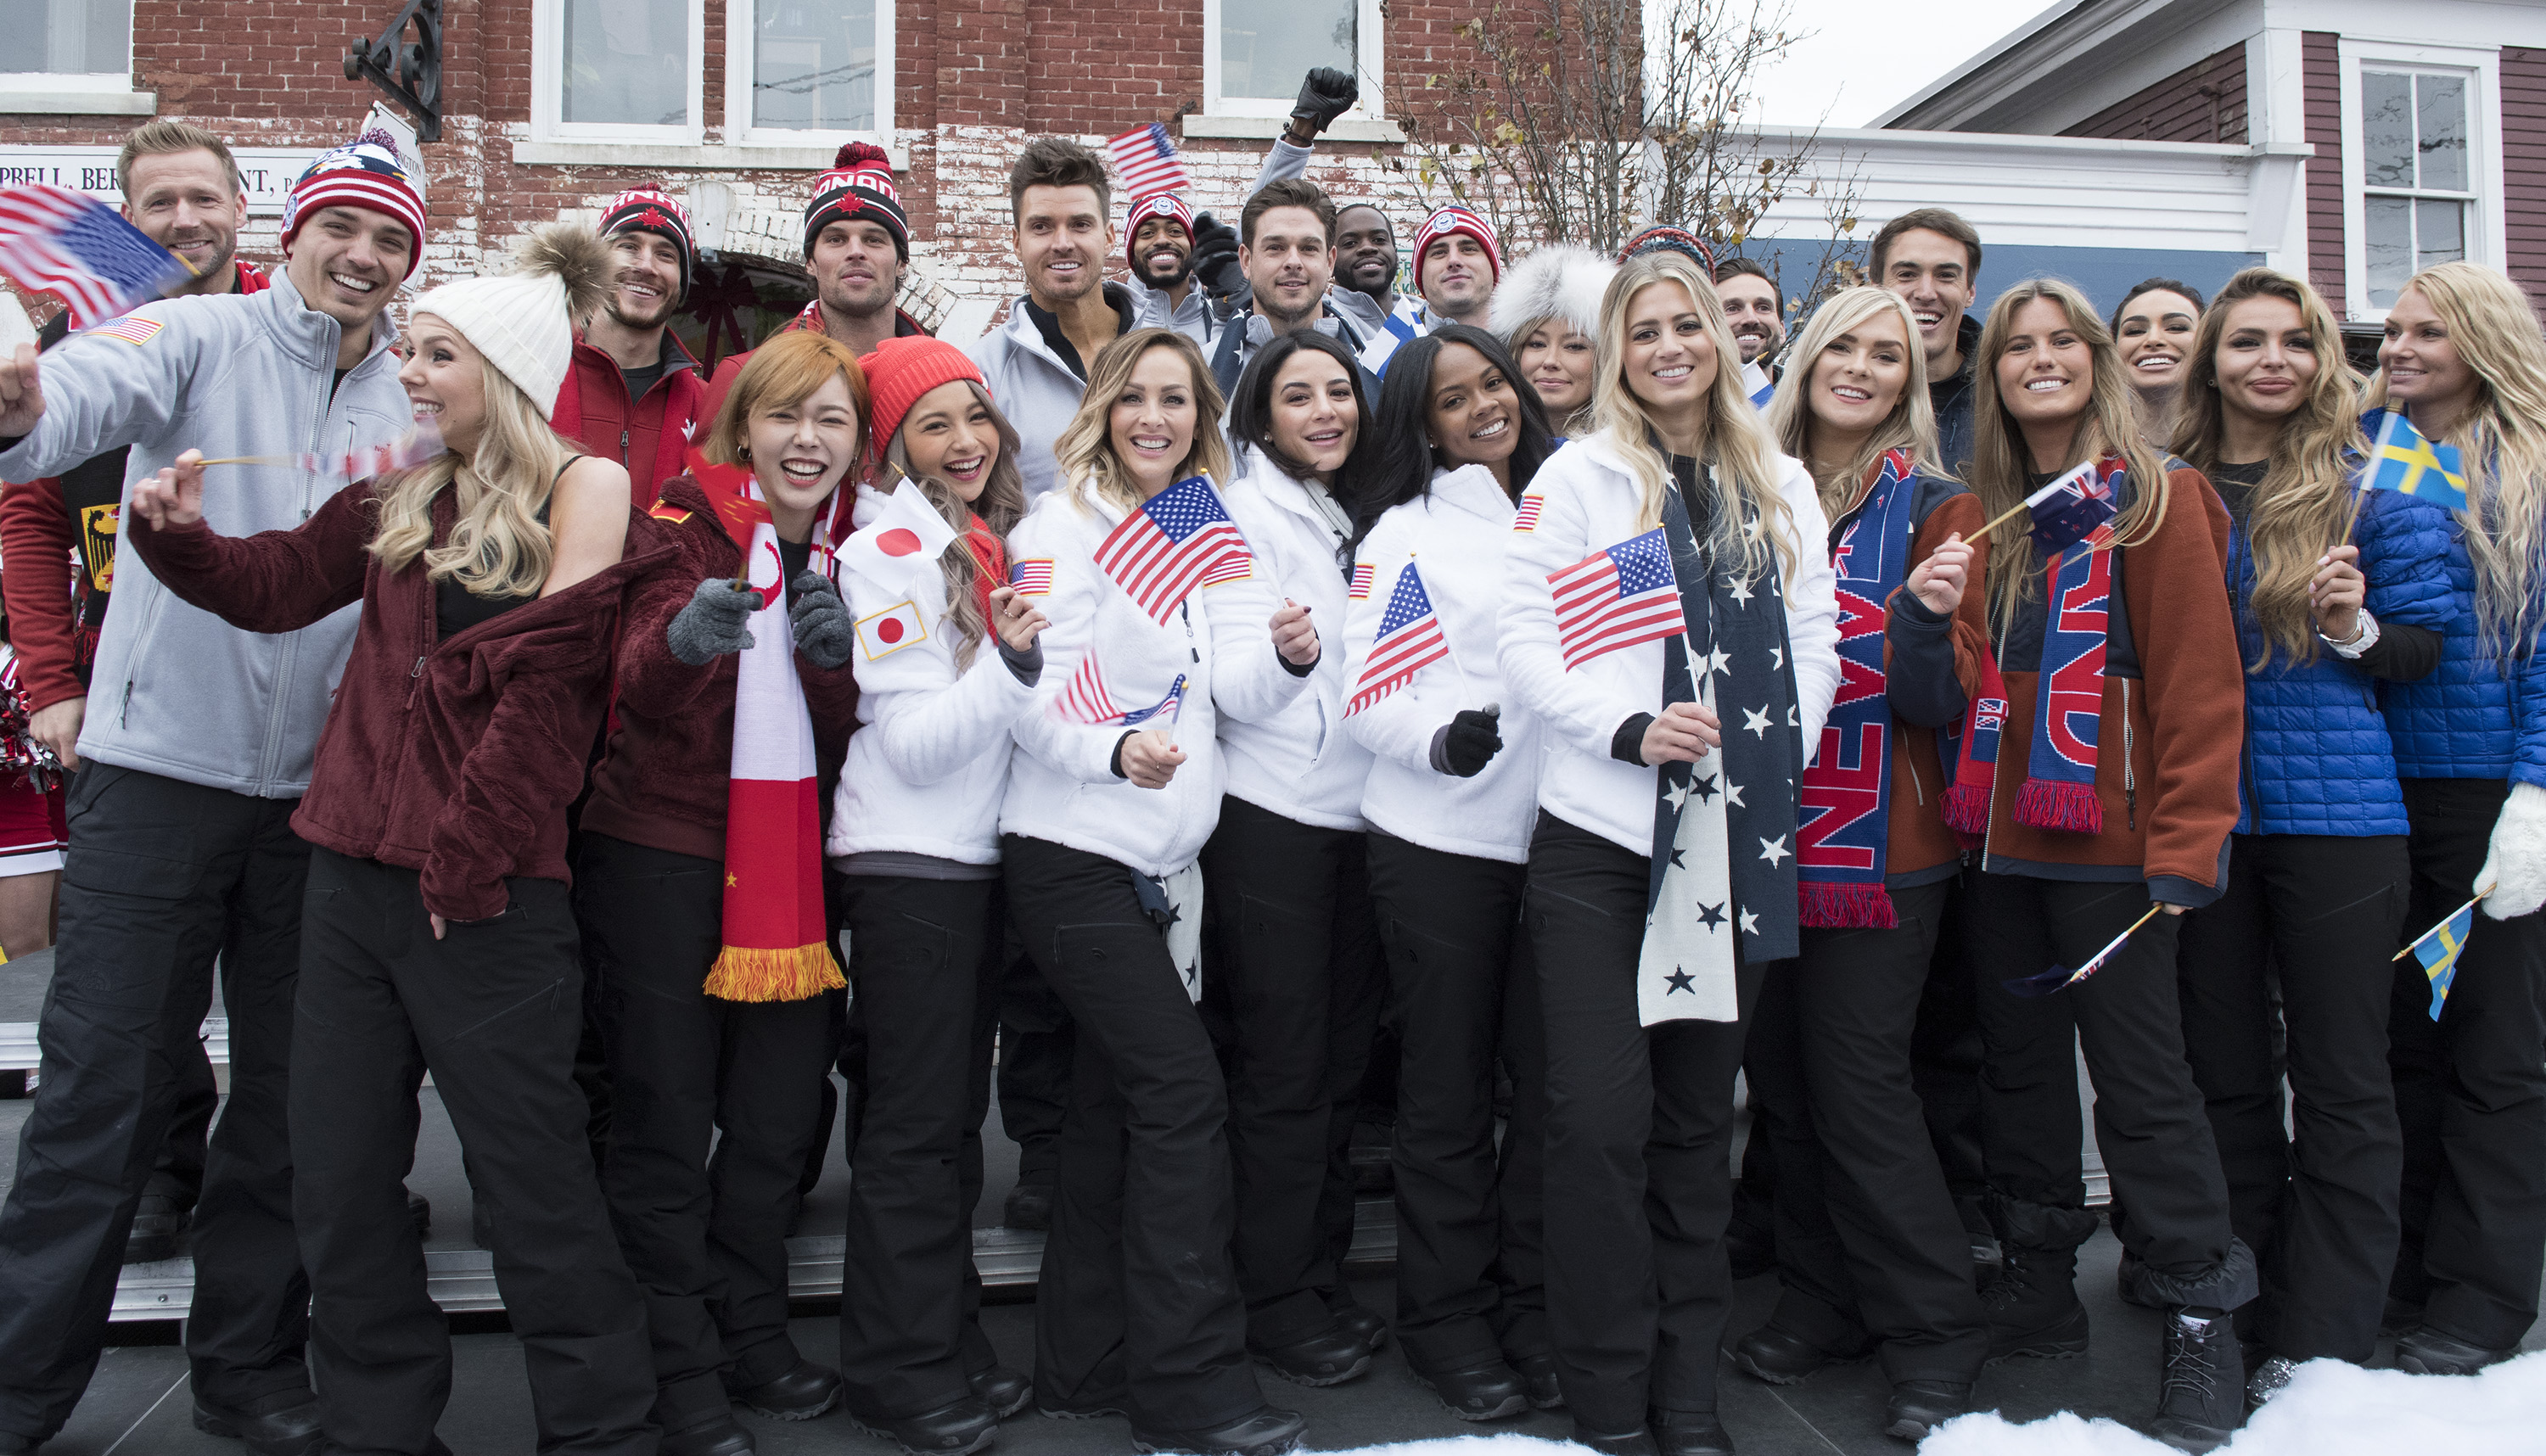 The Bachelor Winter Games Spoilers: See Who Wins the Whole Thing